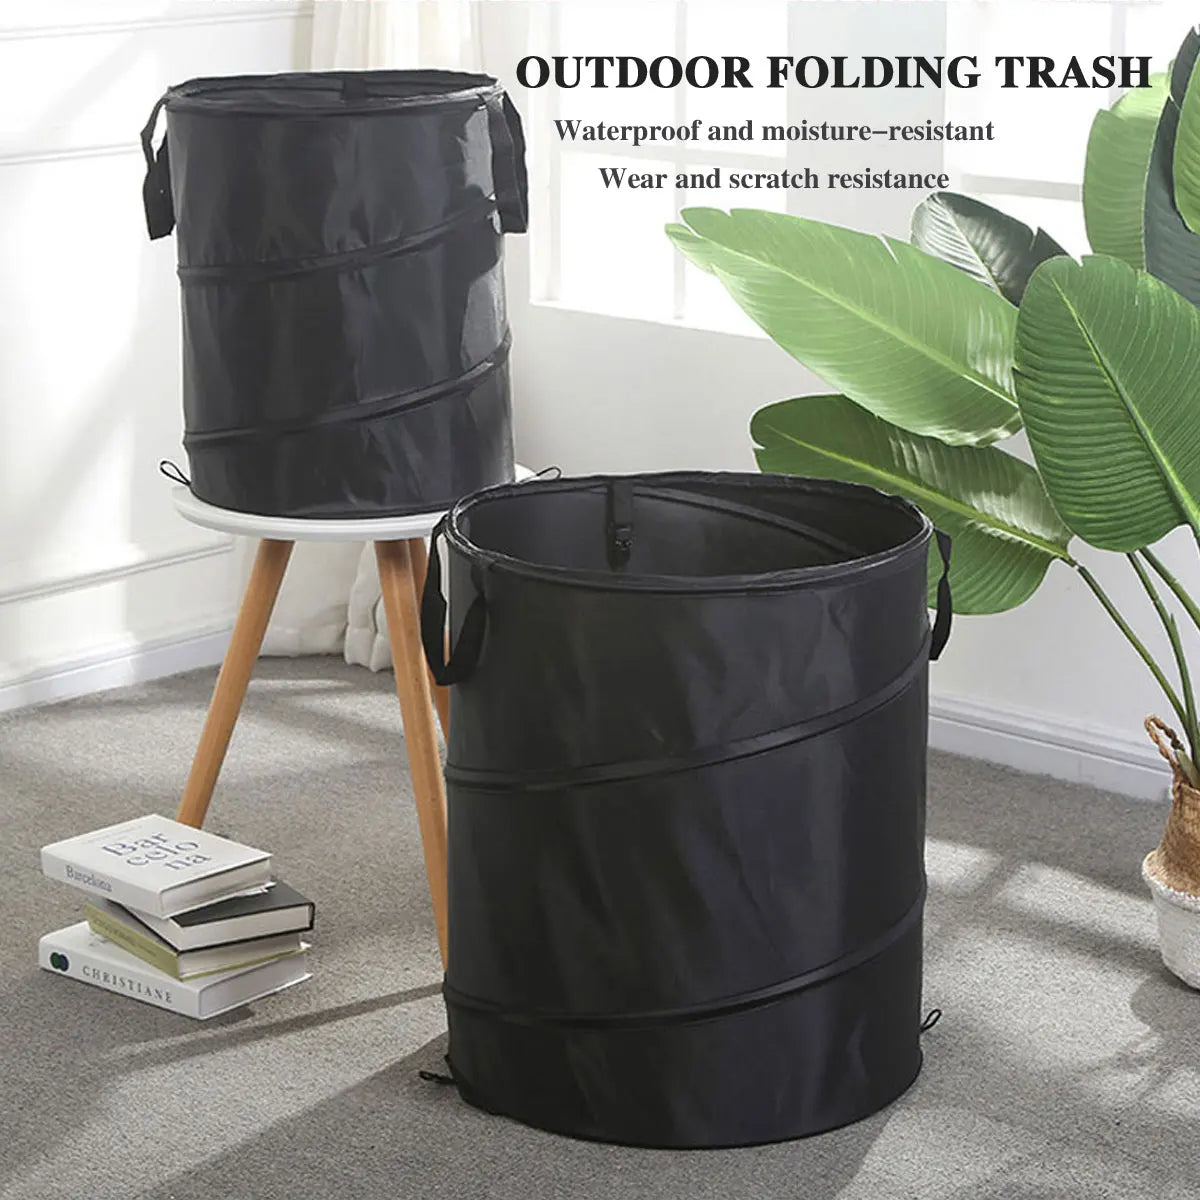 1pc Pop-up Trash Can, Collapsible Car Garbage Can, Car Trash Bag with Elastic Band Hanging, Car Waste Basket with Velcro